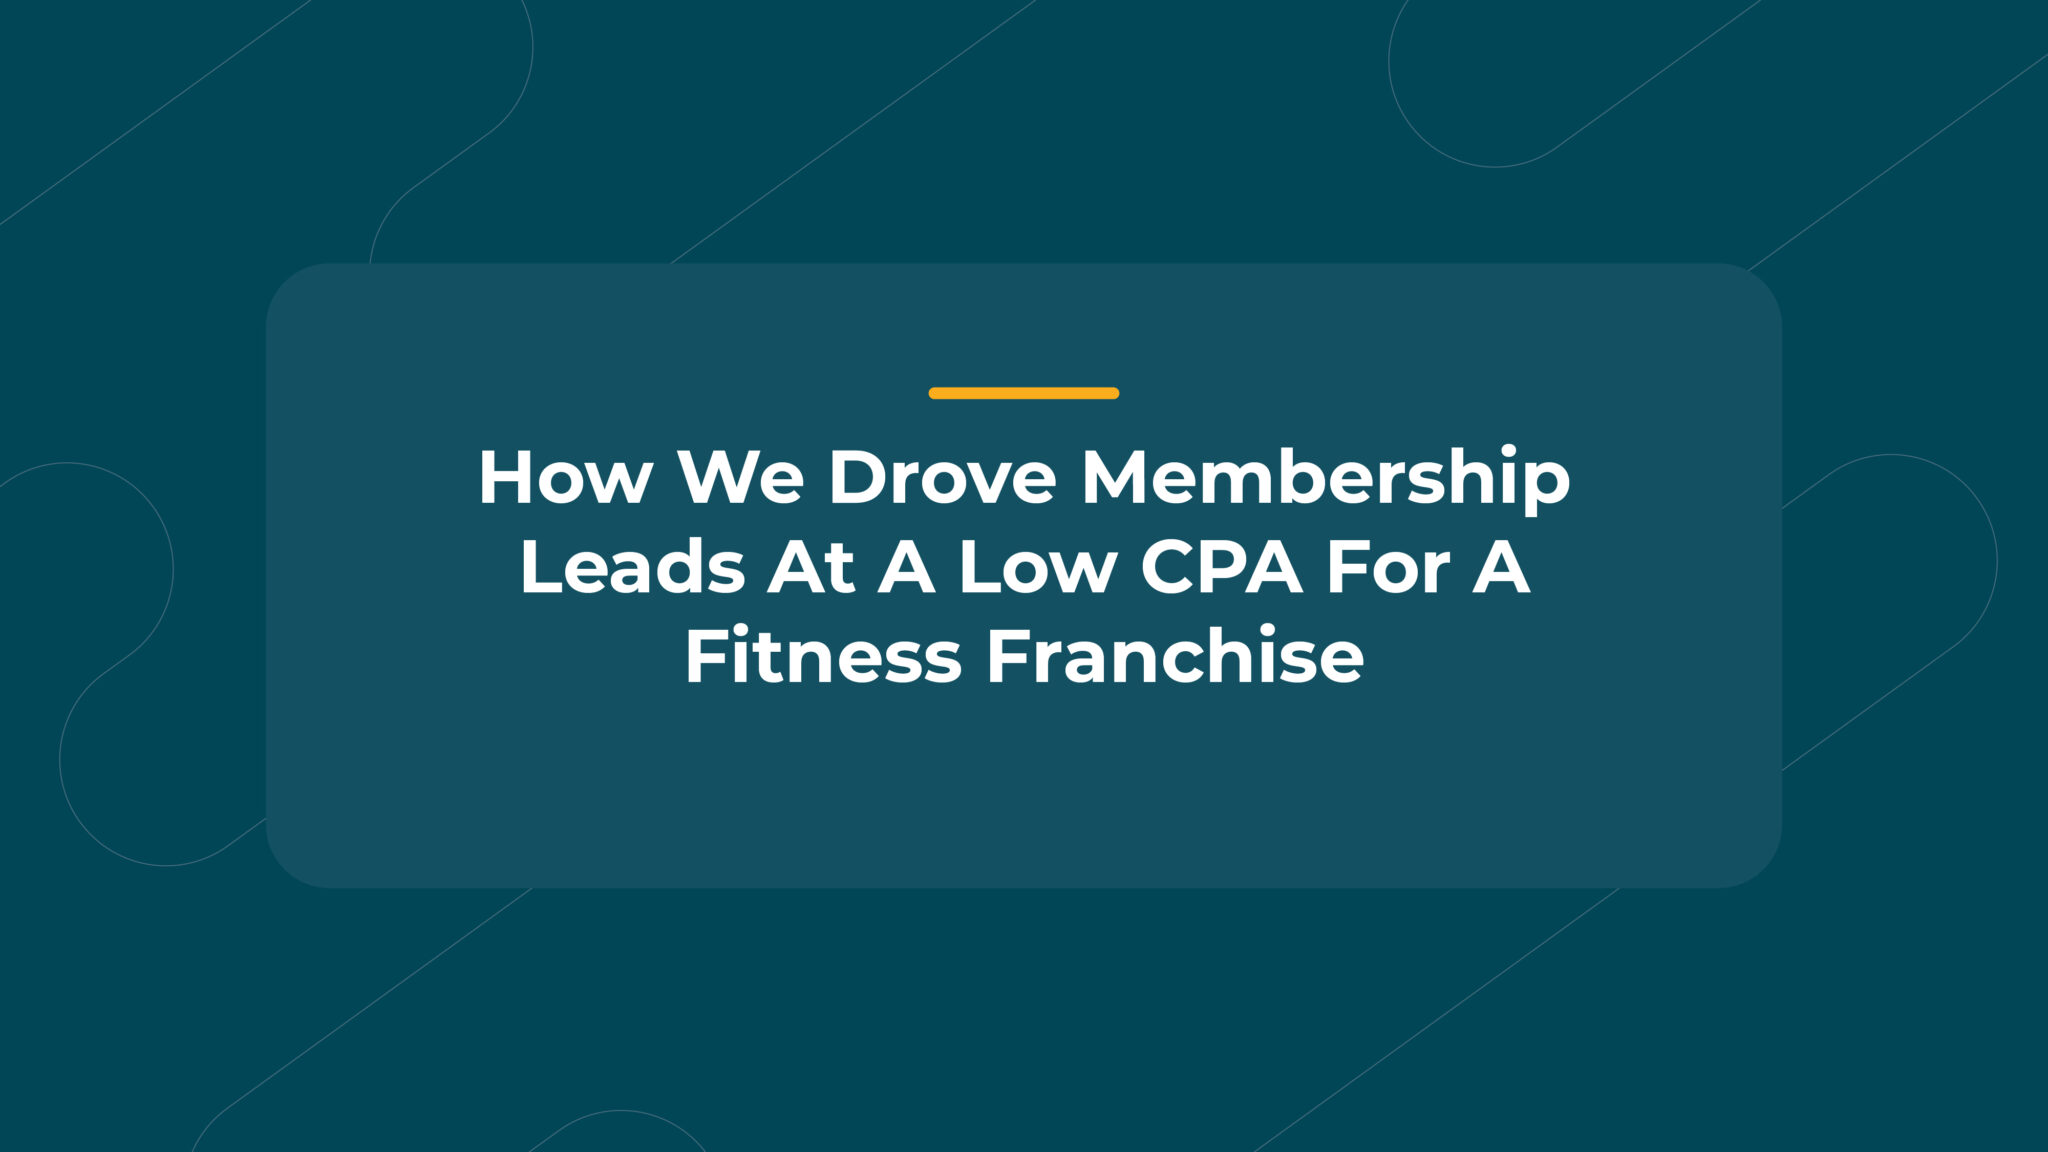 How We Drove Membership Leads At A Low CPA For A Fitness Franchise